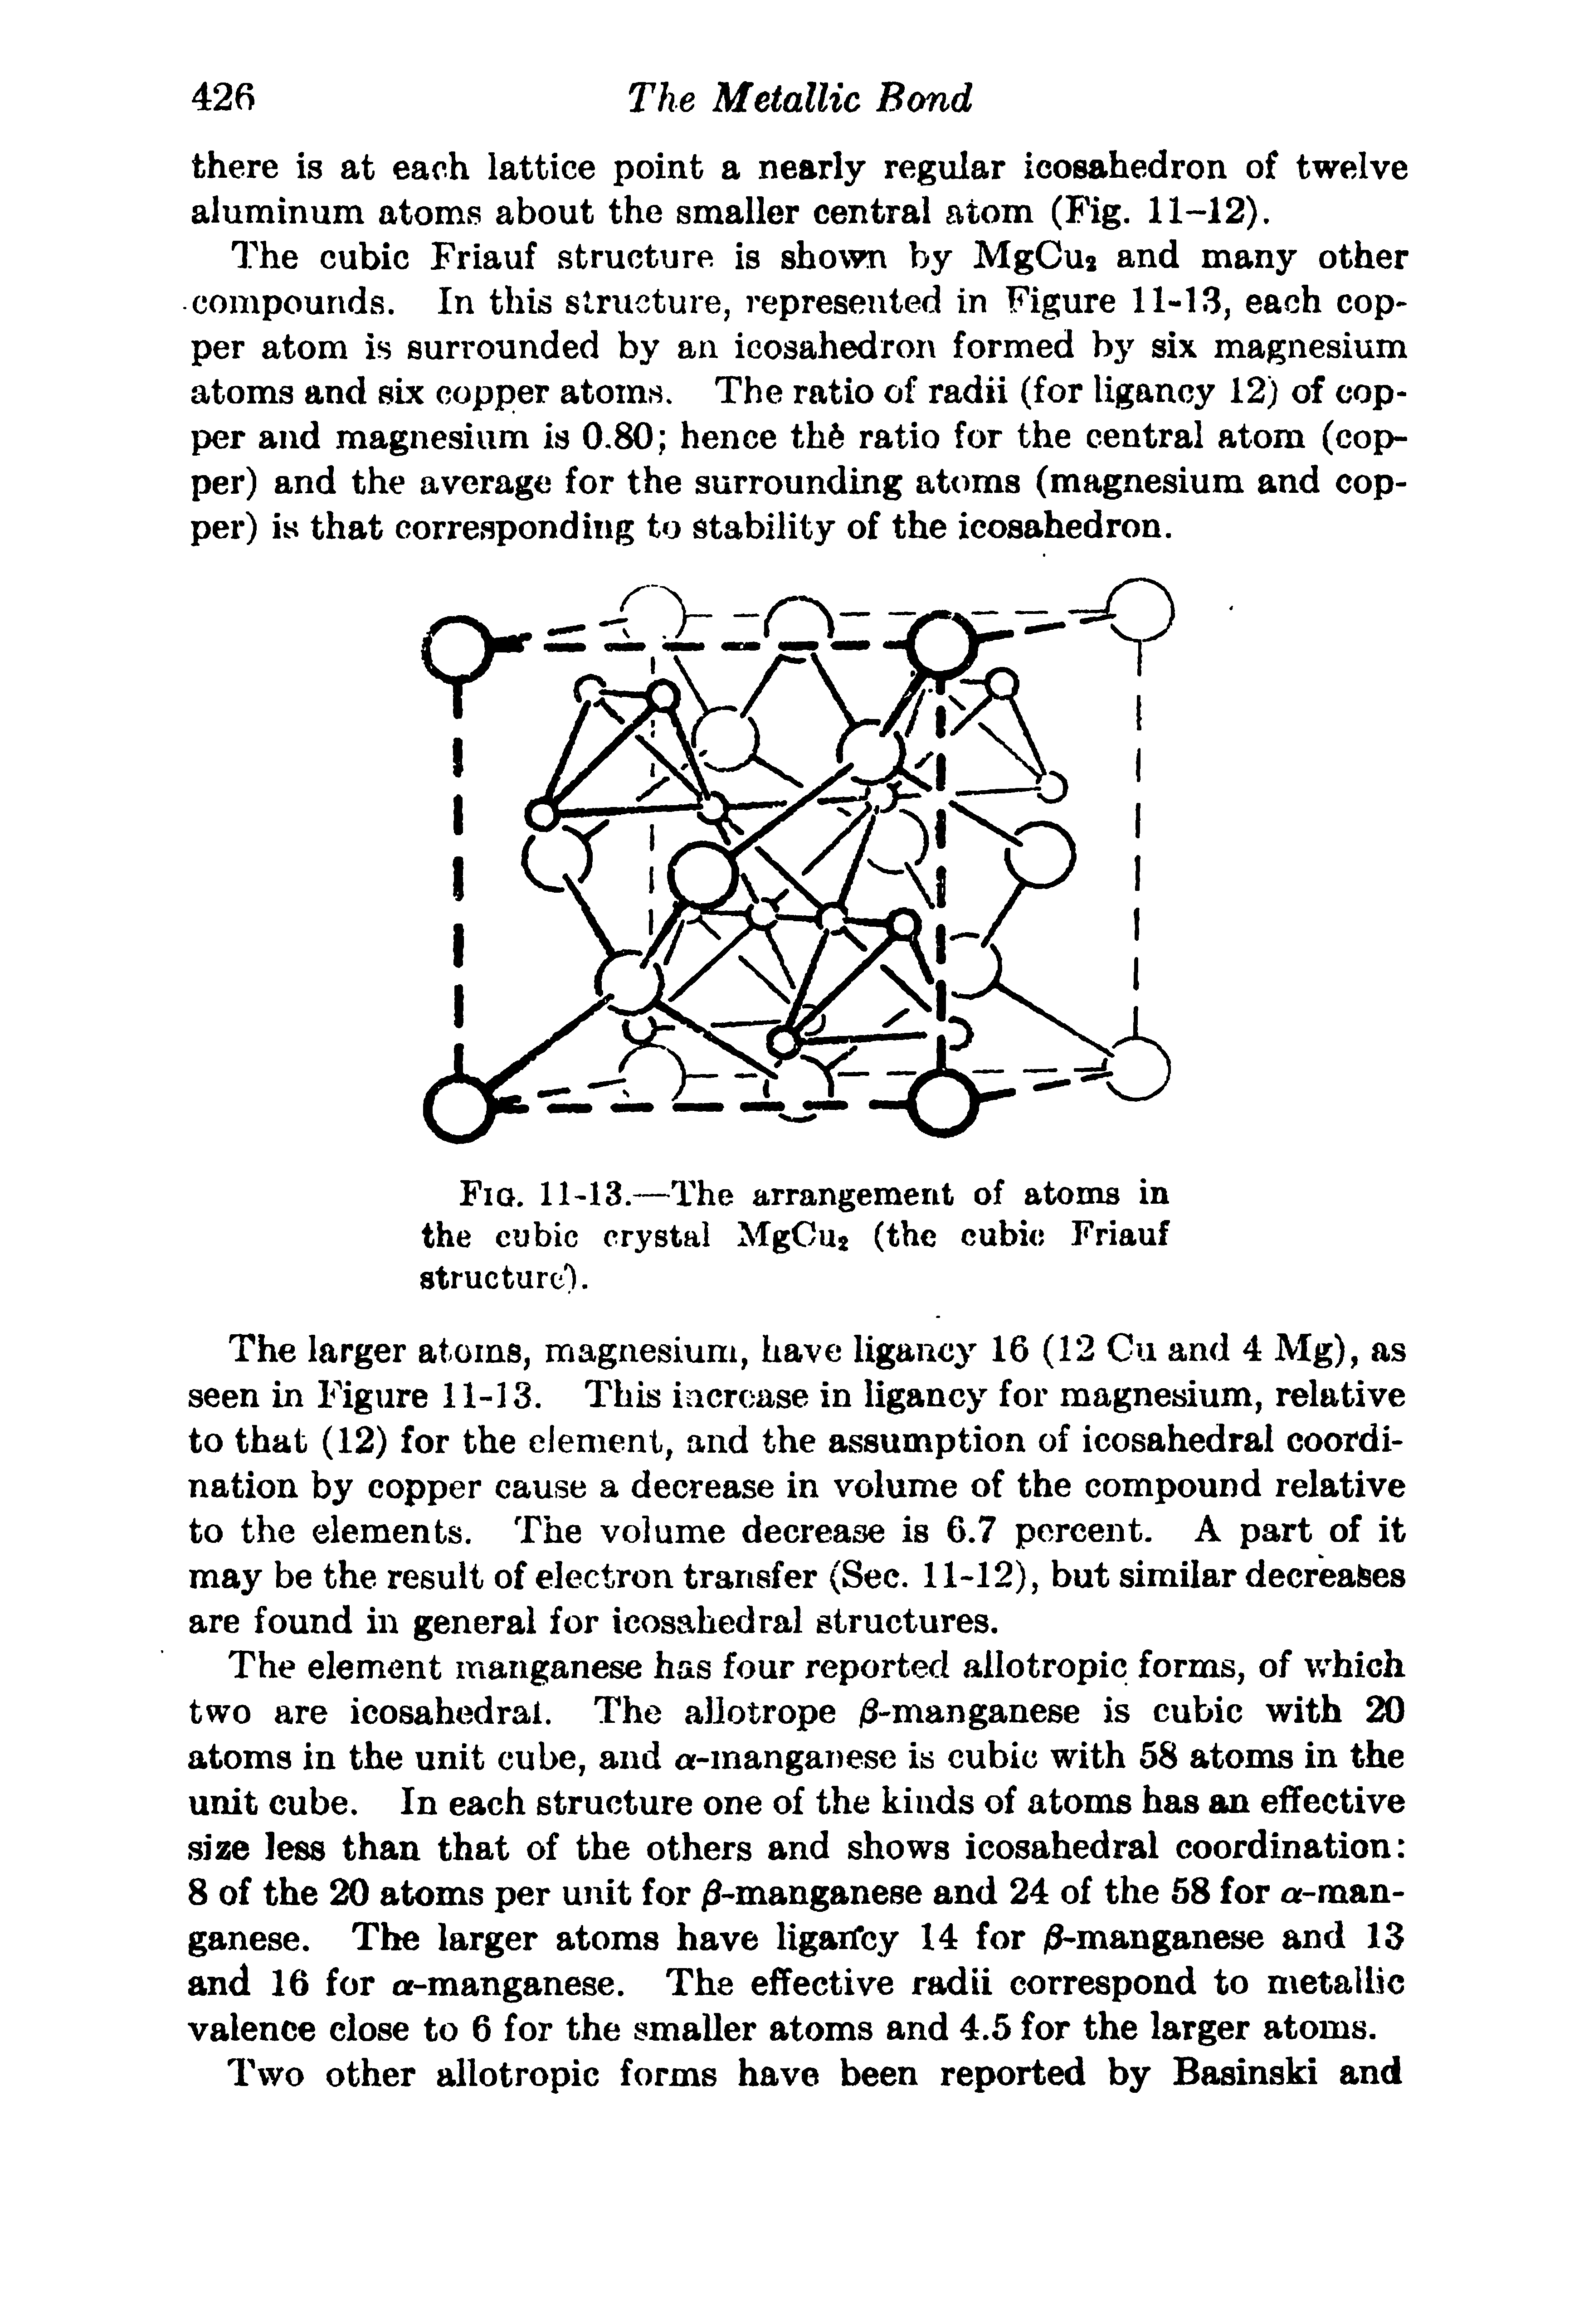 Fig. 11-13.—The arrangement of atoms in the cubic crystal MgCu2 (the cubic Friauf structure).